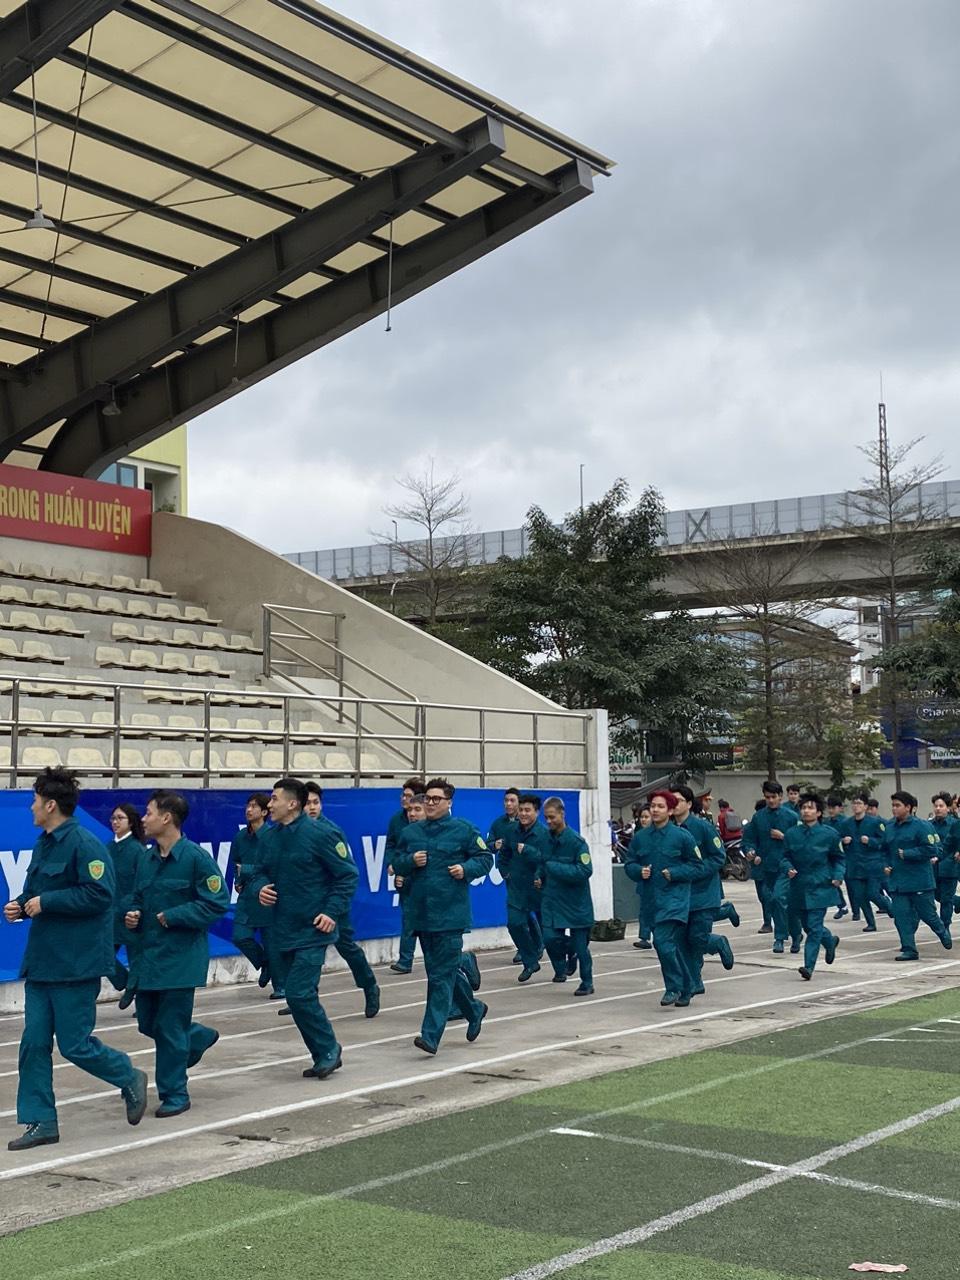 A group of people in blue uniforms running on a field

Description automatically generated